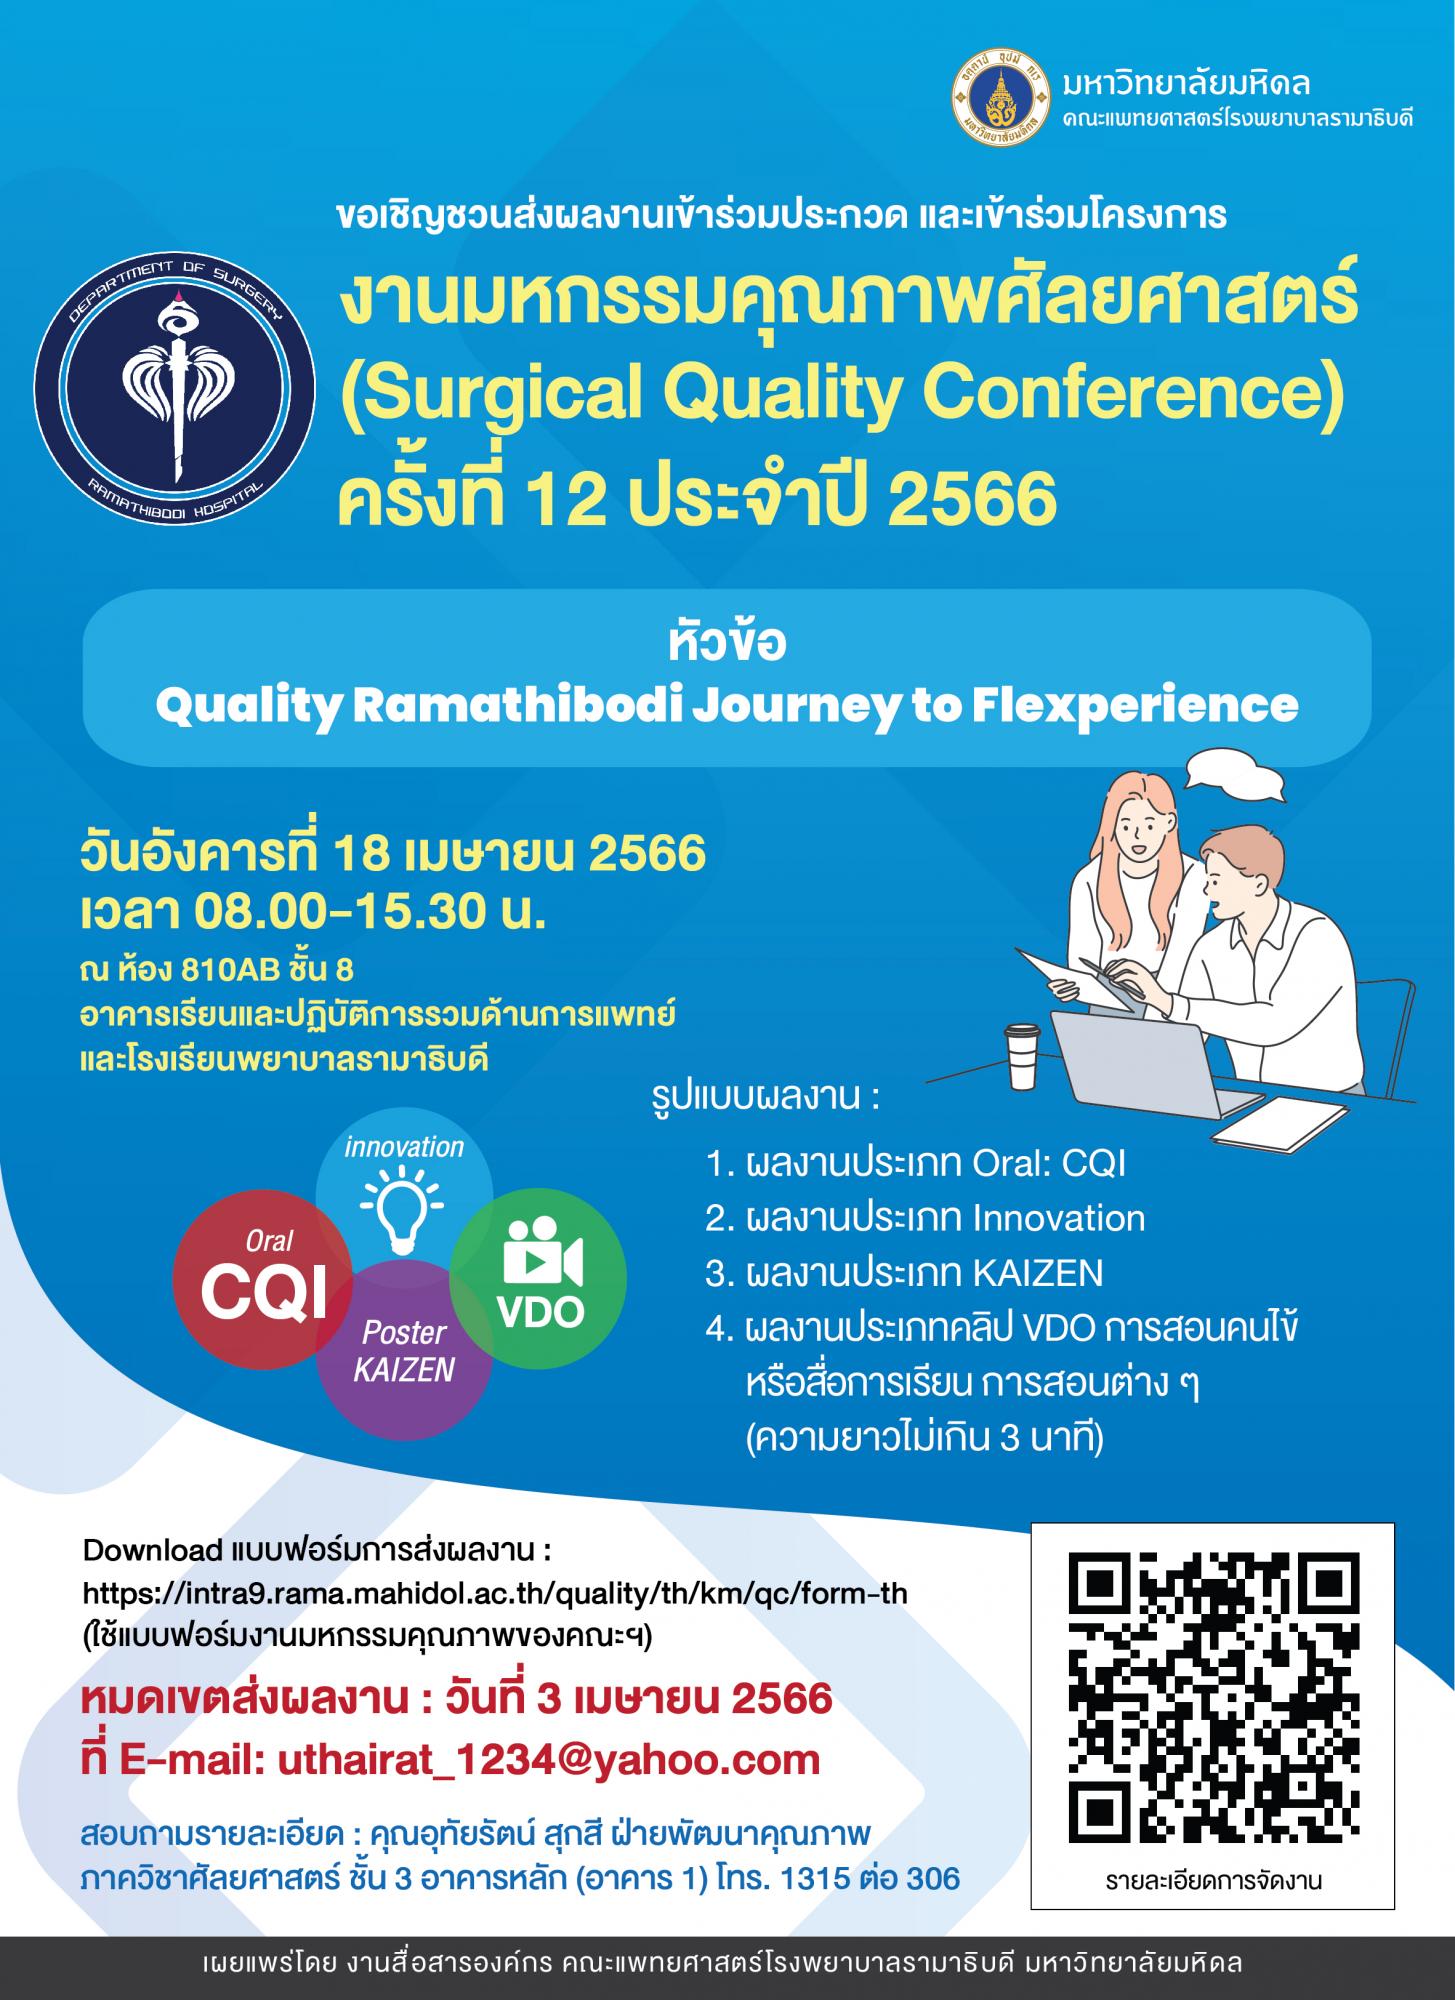 12th Surgical Quality Conference